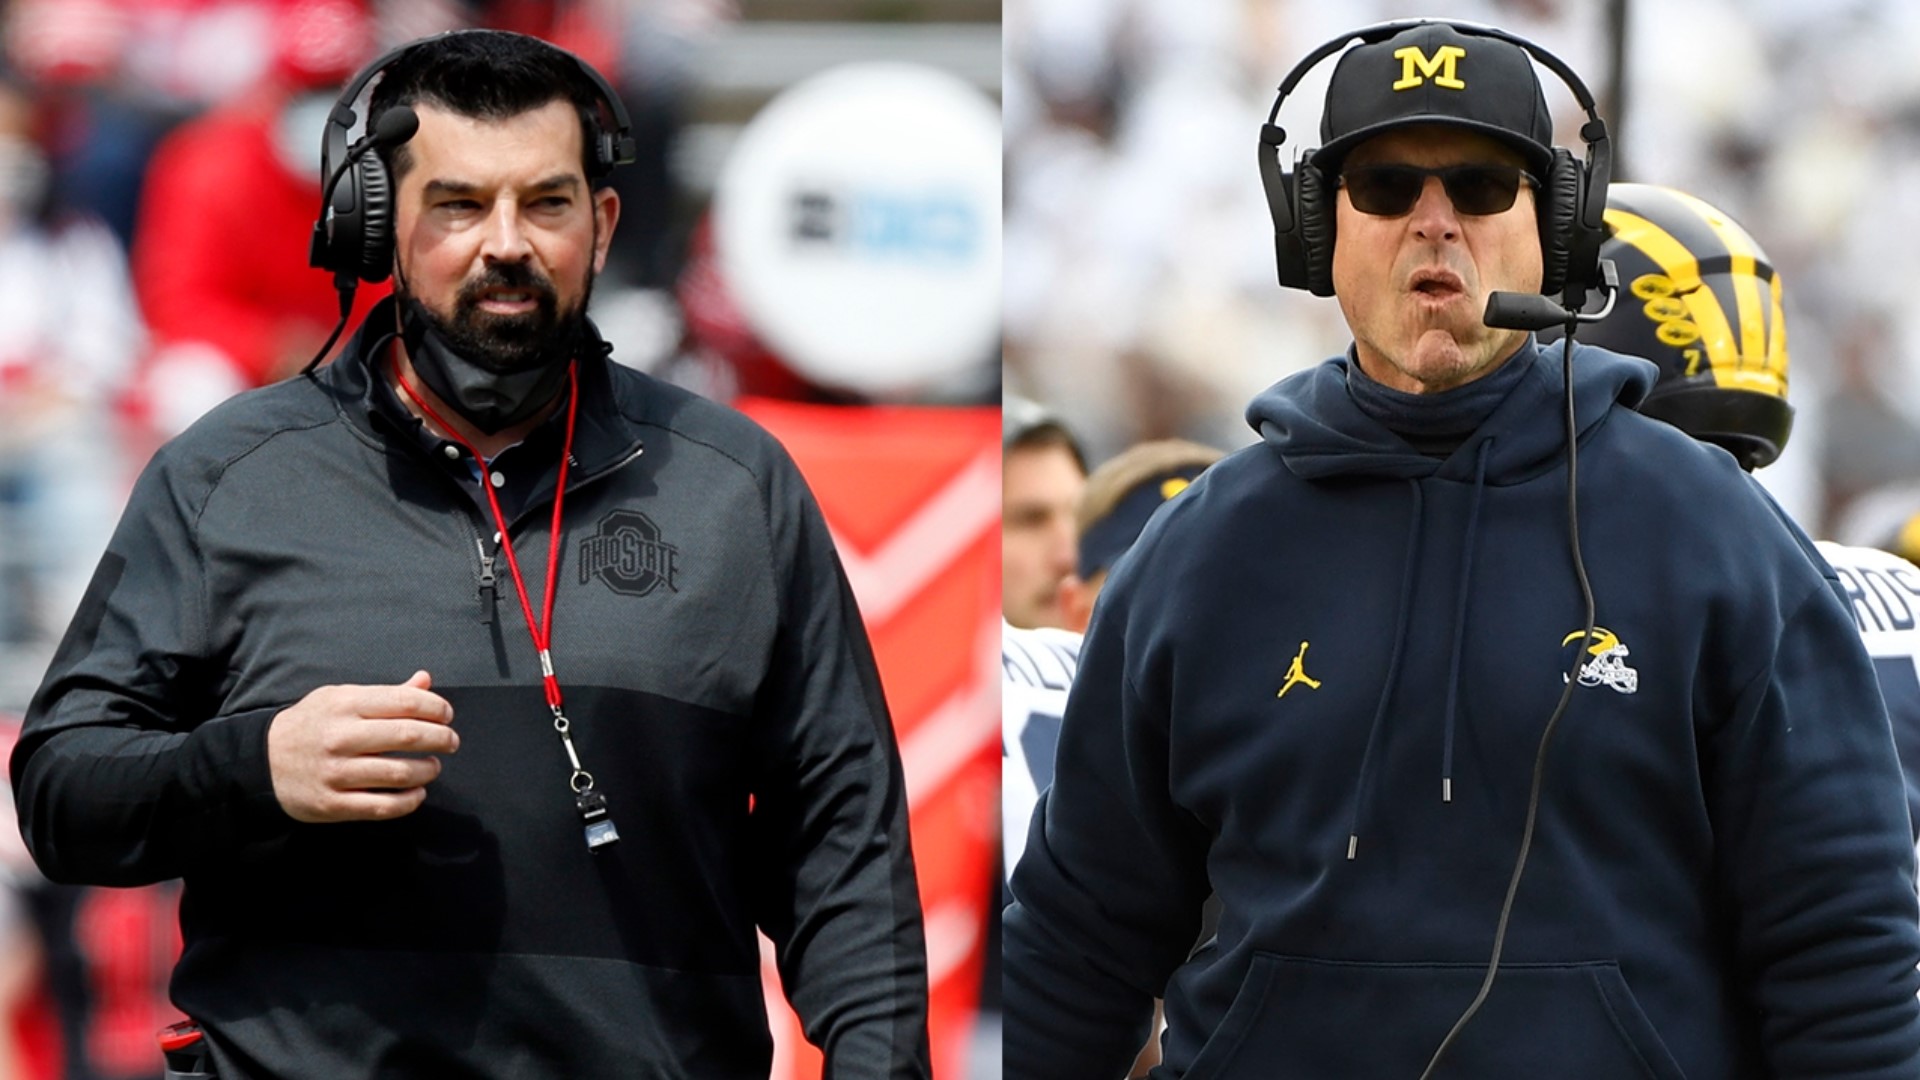 10TV & 97.1 The Fan discuss how coaches Ryan Day and Jim Harbaugh prepare for the rivalry game.